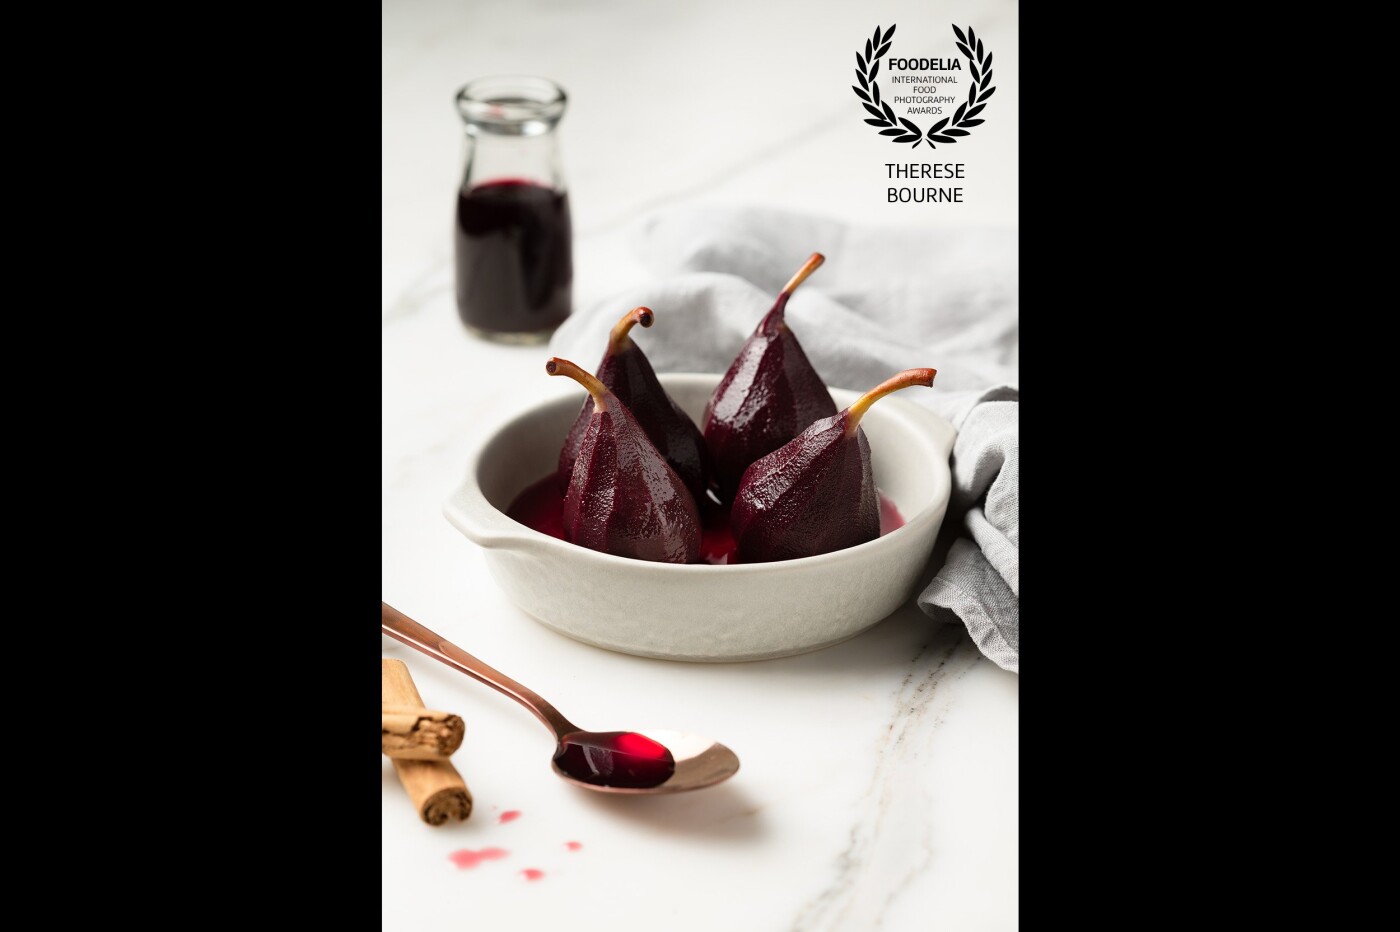 I shot these gorgeous poached pears for a magazine and it made the front cover. I love the intense color and the shine of the syrup against the bright neutral setting.